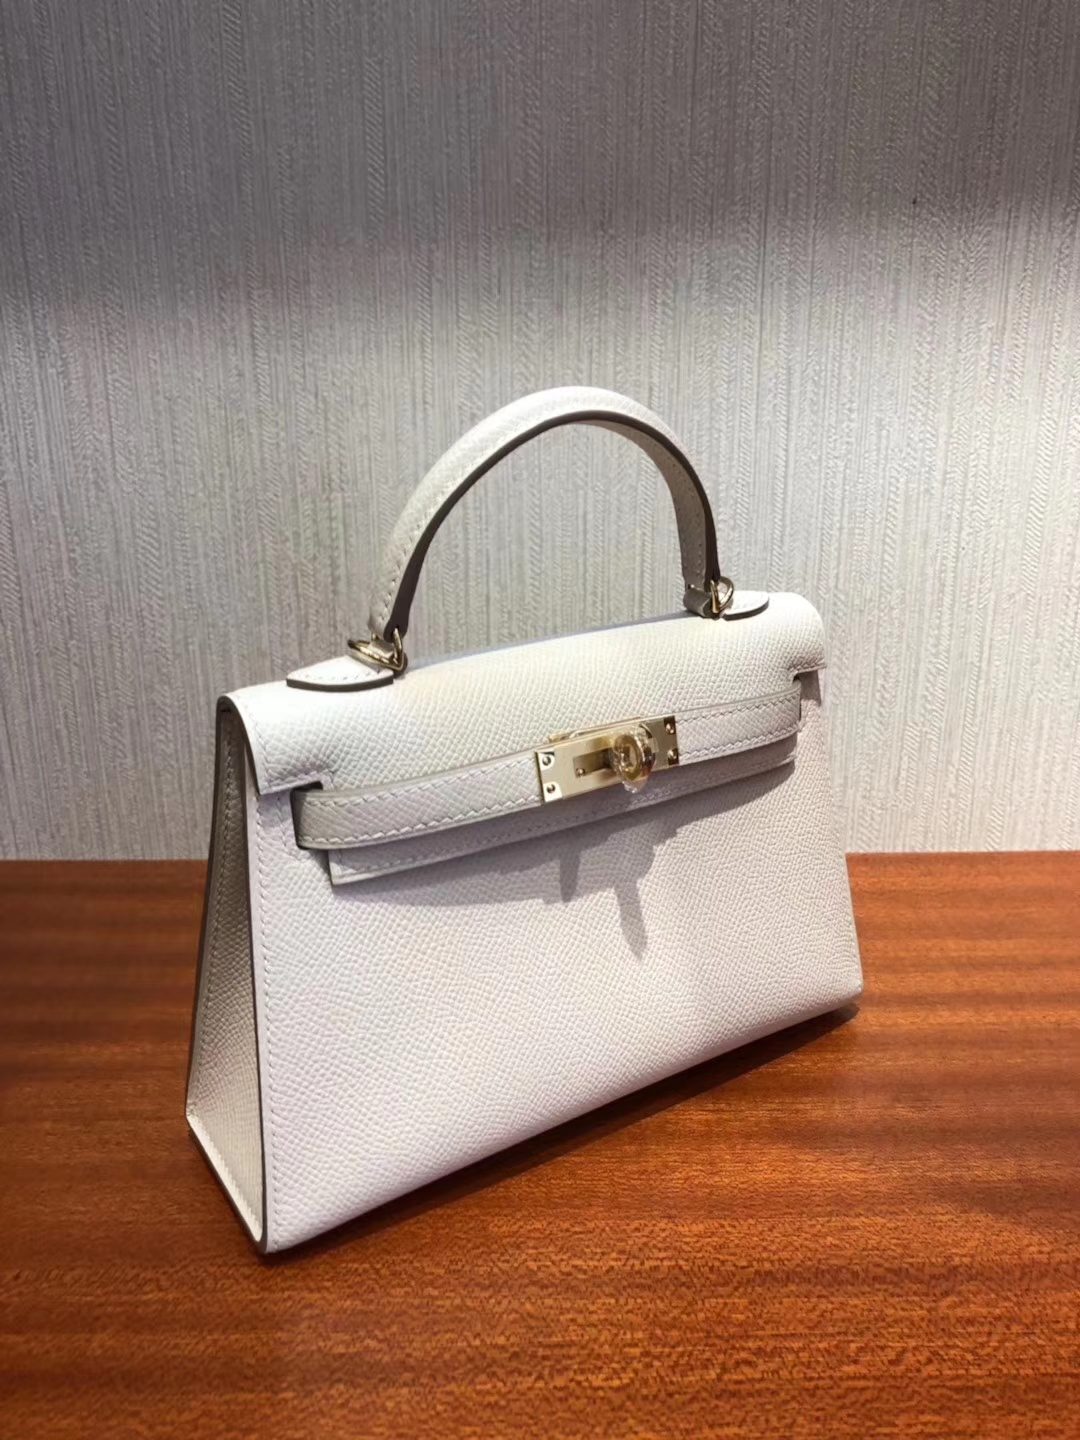 Sale Hermes Epsom Calf Minikelly-2 Clutch Bag in CK10 Craie White Silver/Gold Hardware